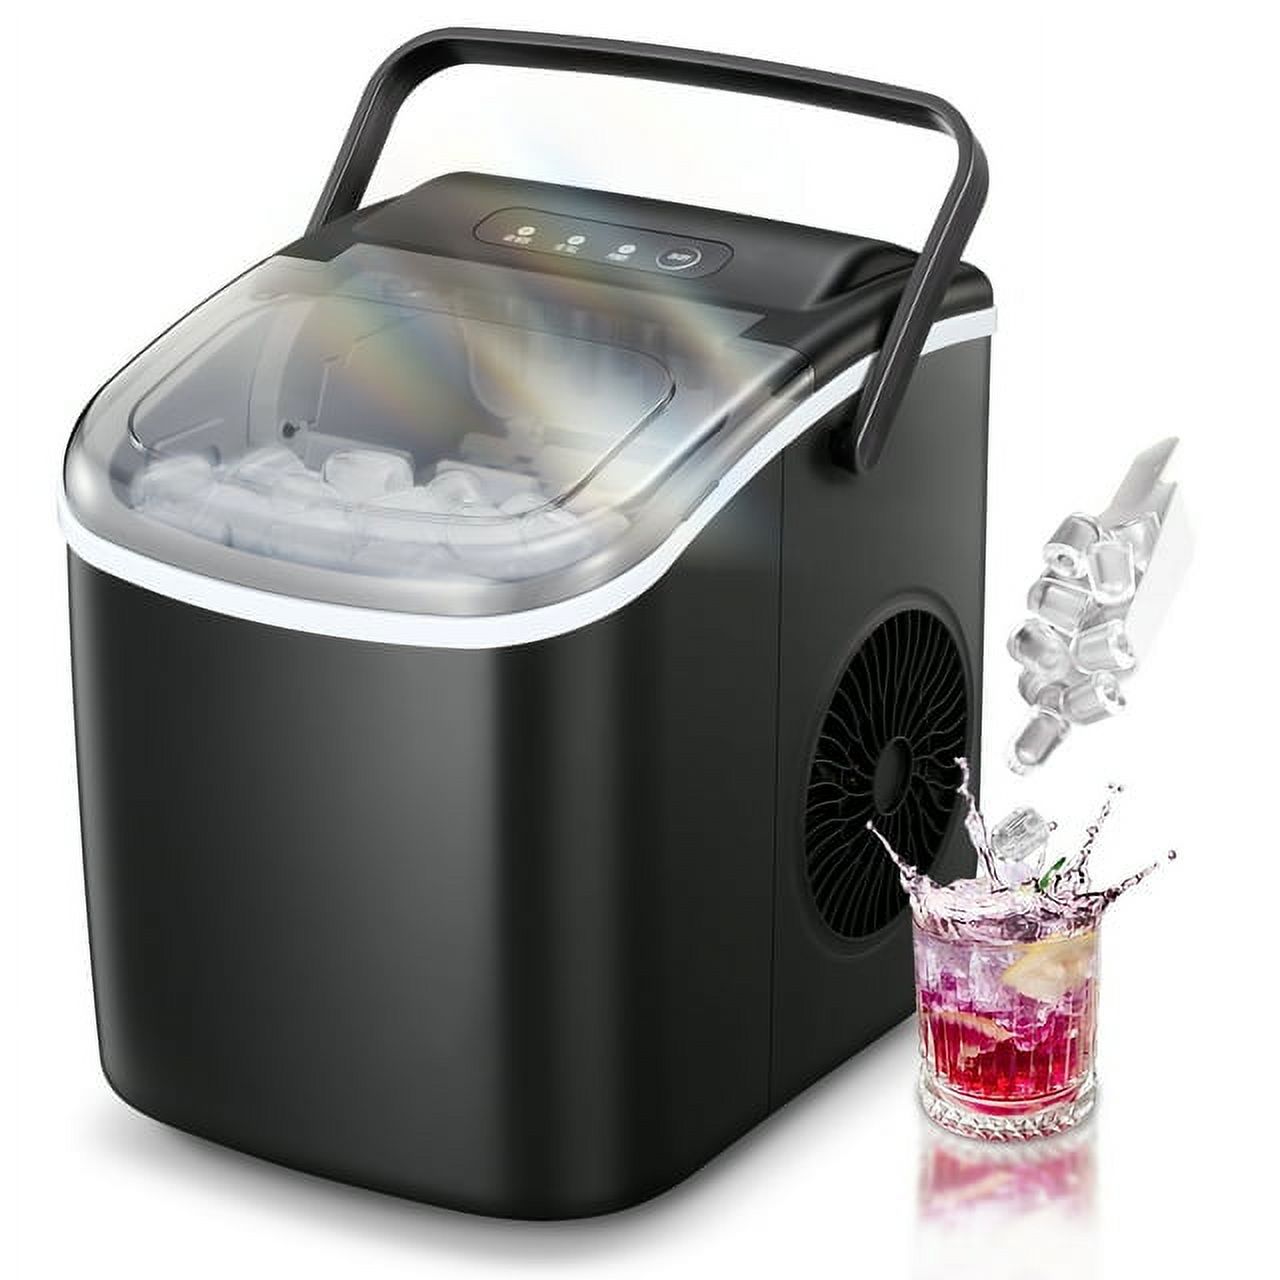 KISSAIR Portable Ice Maker Countertop, 9Pcs/8Mins, 26lbs/24H, Self-Cleaning  Ice Machine with Handle for Kitchen/Office/Bar/Party, Black